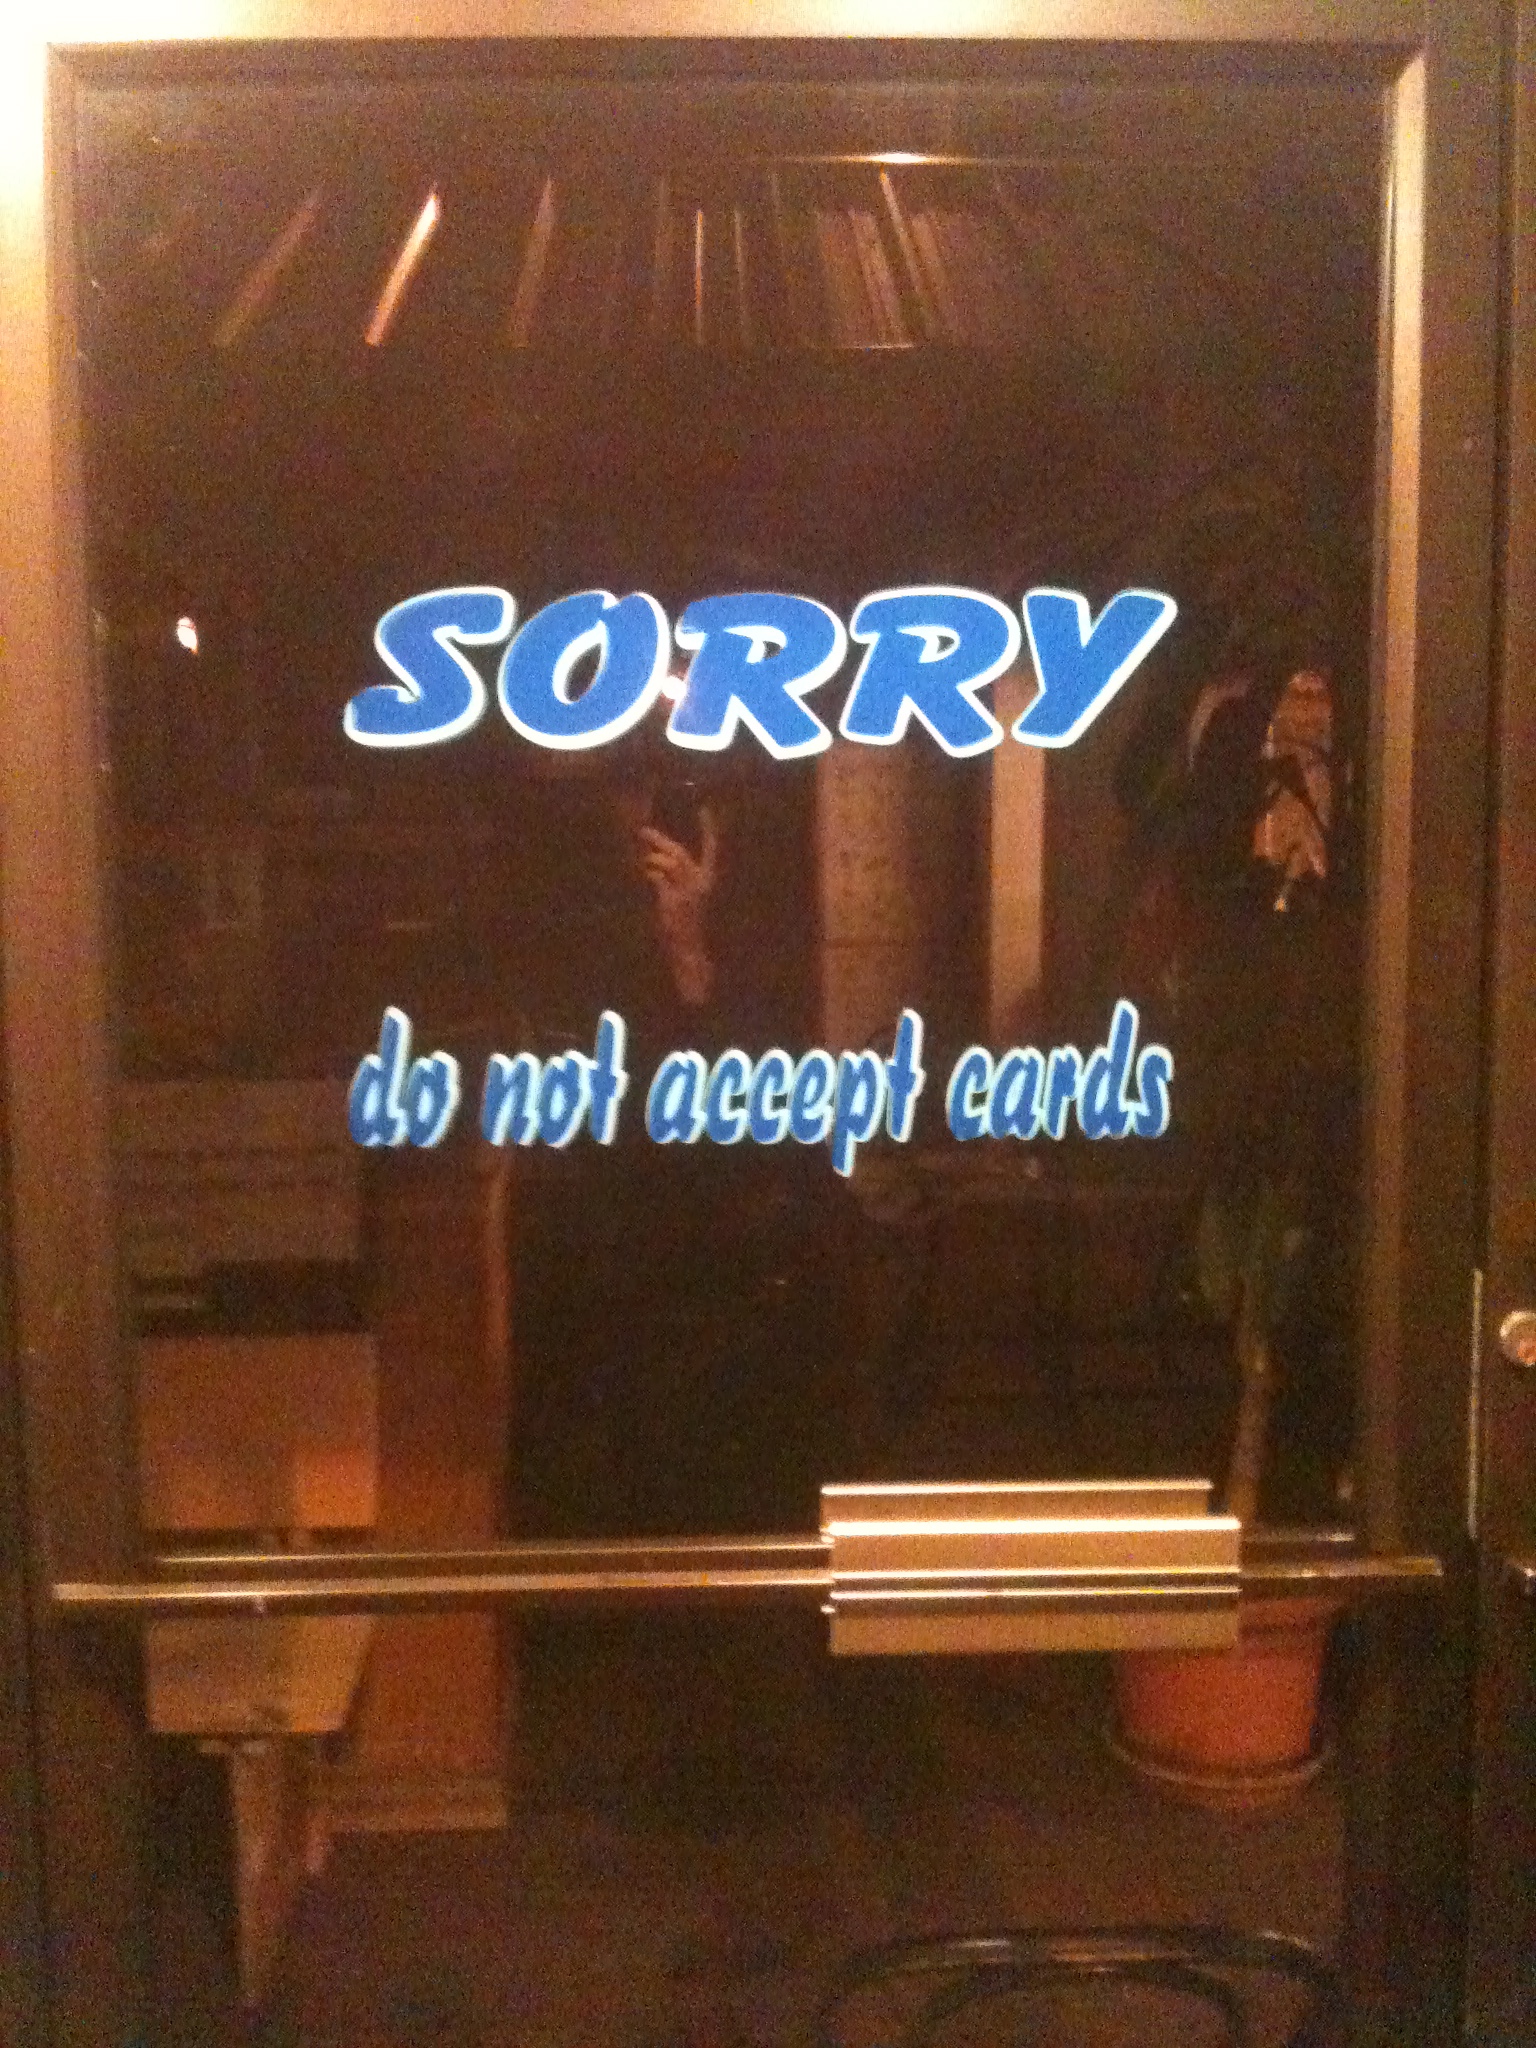 "SORRY" sign